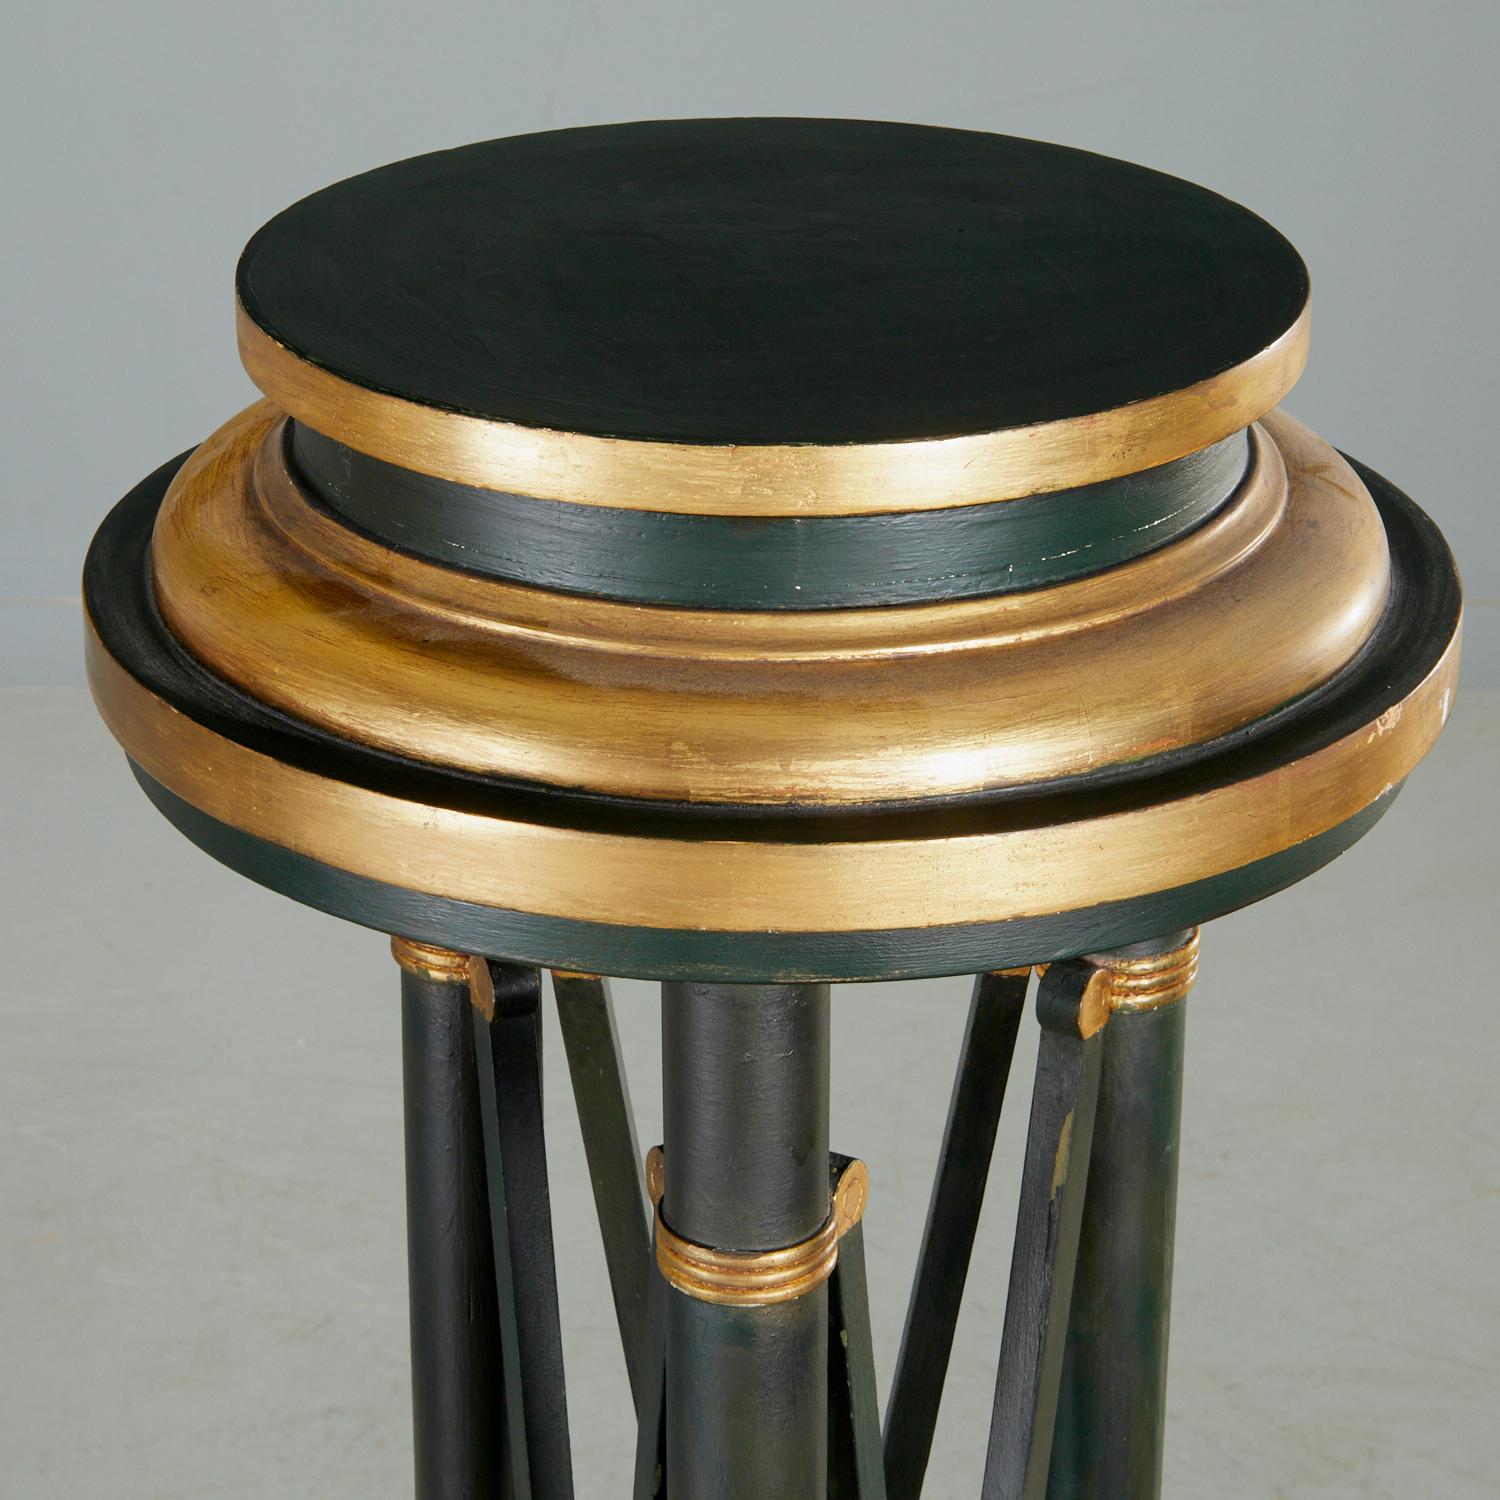 An elegant matching pair of 20th c., Continental (probably Italian) Greco-Roman style tripod stands with ebonized and parcel gilt finish, unmarked. The pedestals each have a tripod body with x-form supports on a paw feet scroll triform base. These